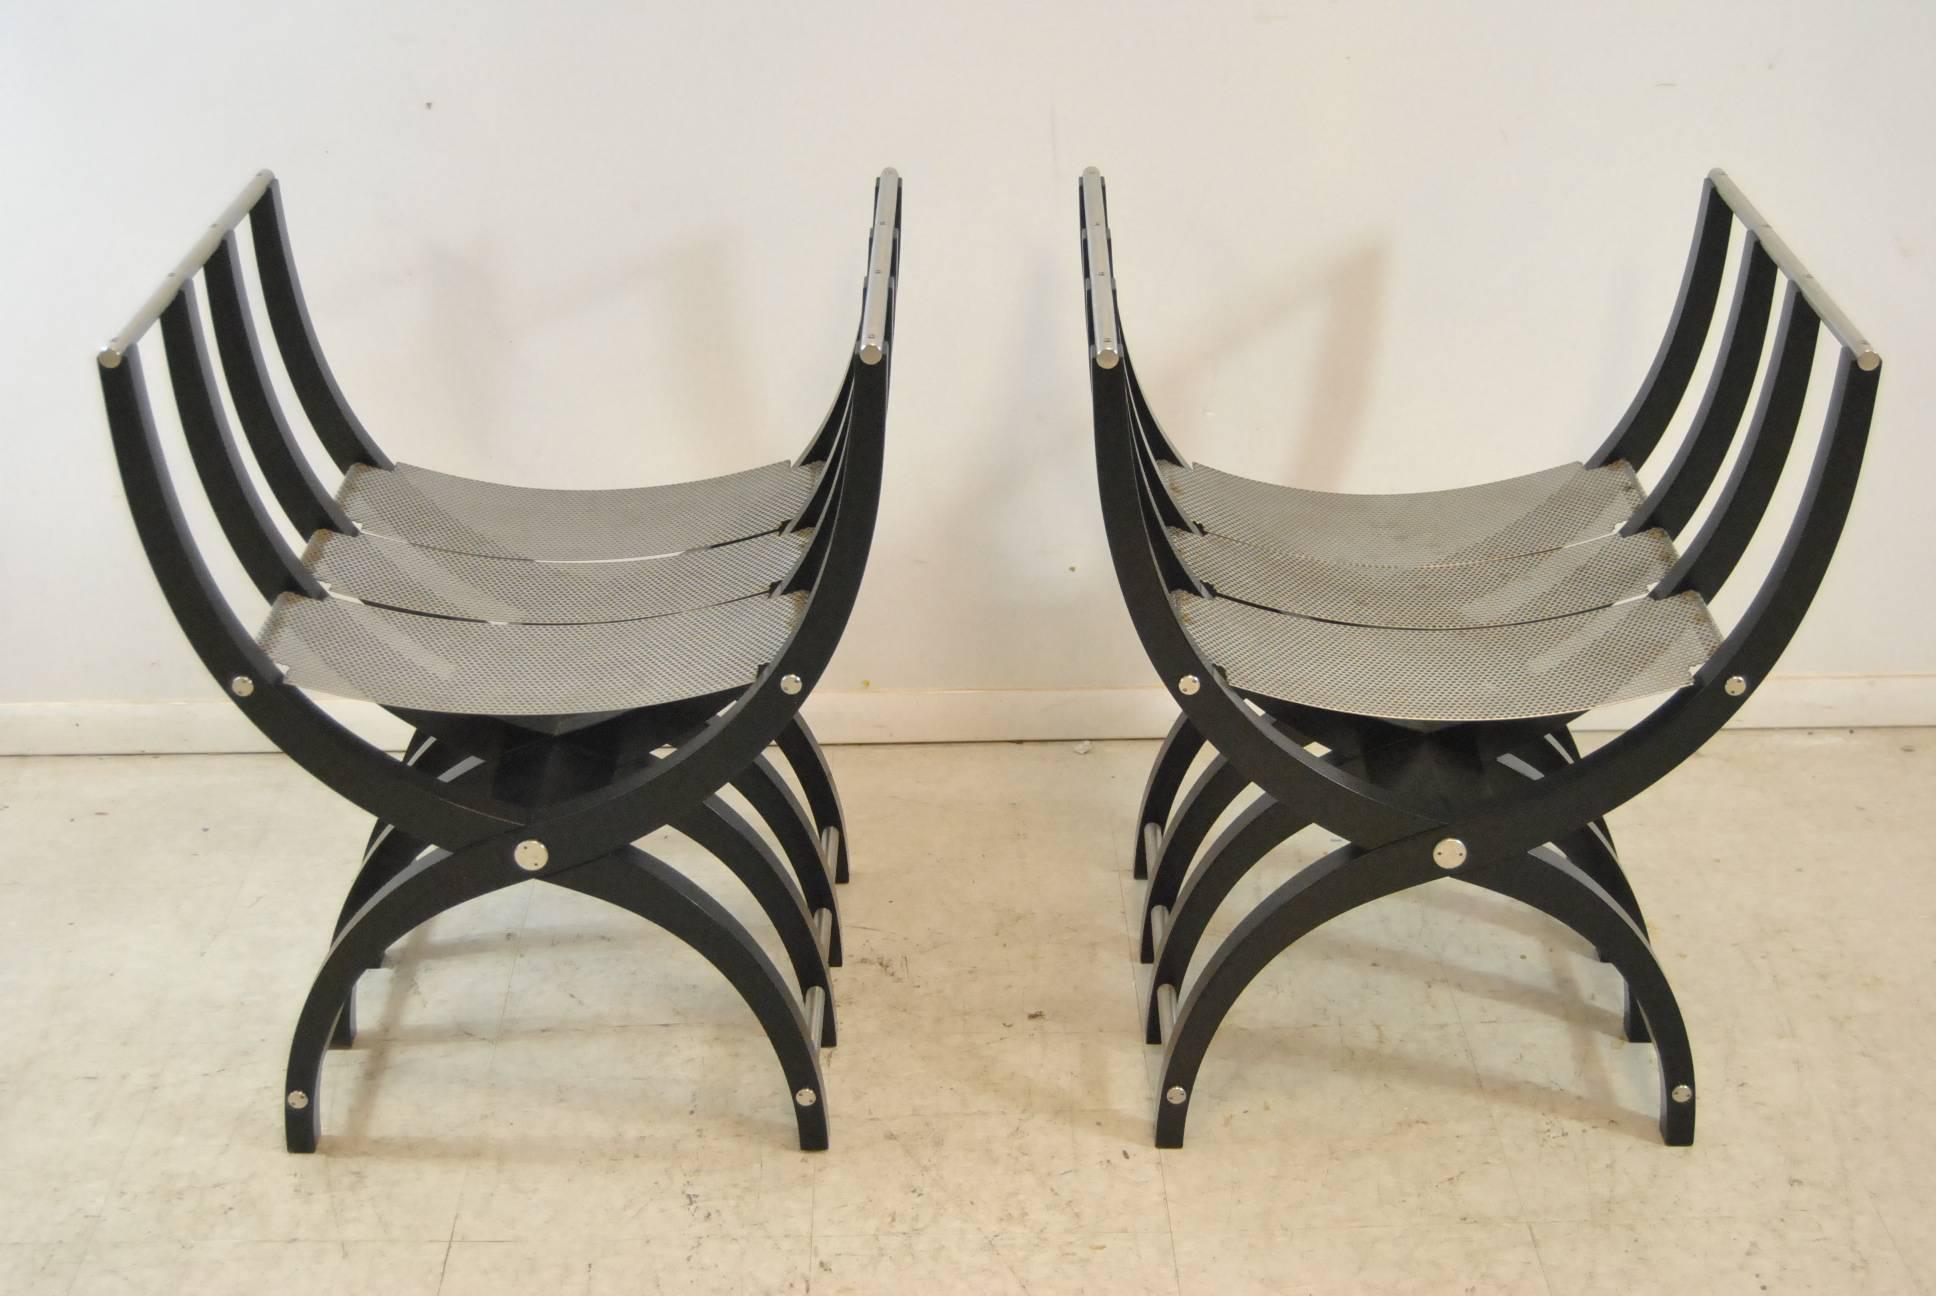 An incredible pair of Savonarola chairs. These unusual chairs feature a black lacquer finish with a pierced steel frame. These unique chairs will make a statement in any home. Very good condition. Dimensions: 20